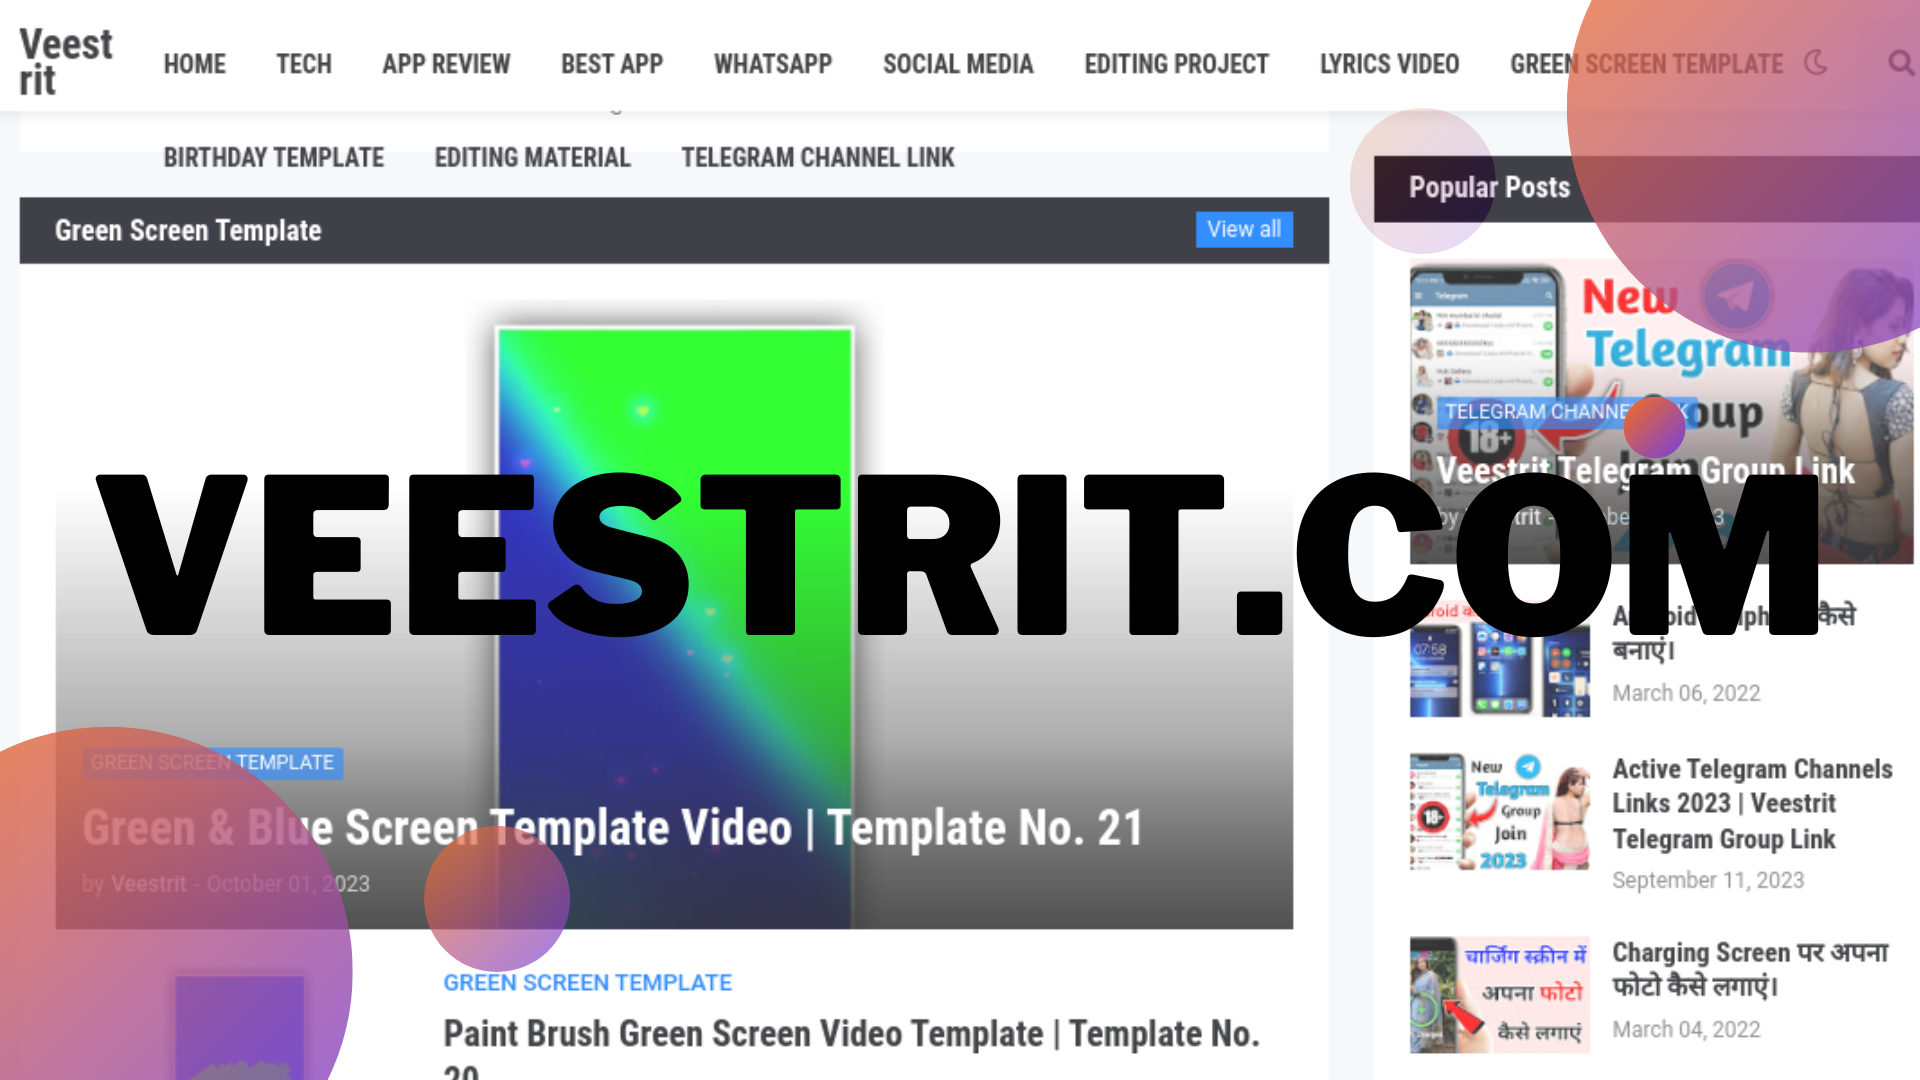 Get Up-to-Date Tech News with Veestrit 